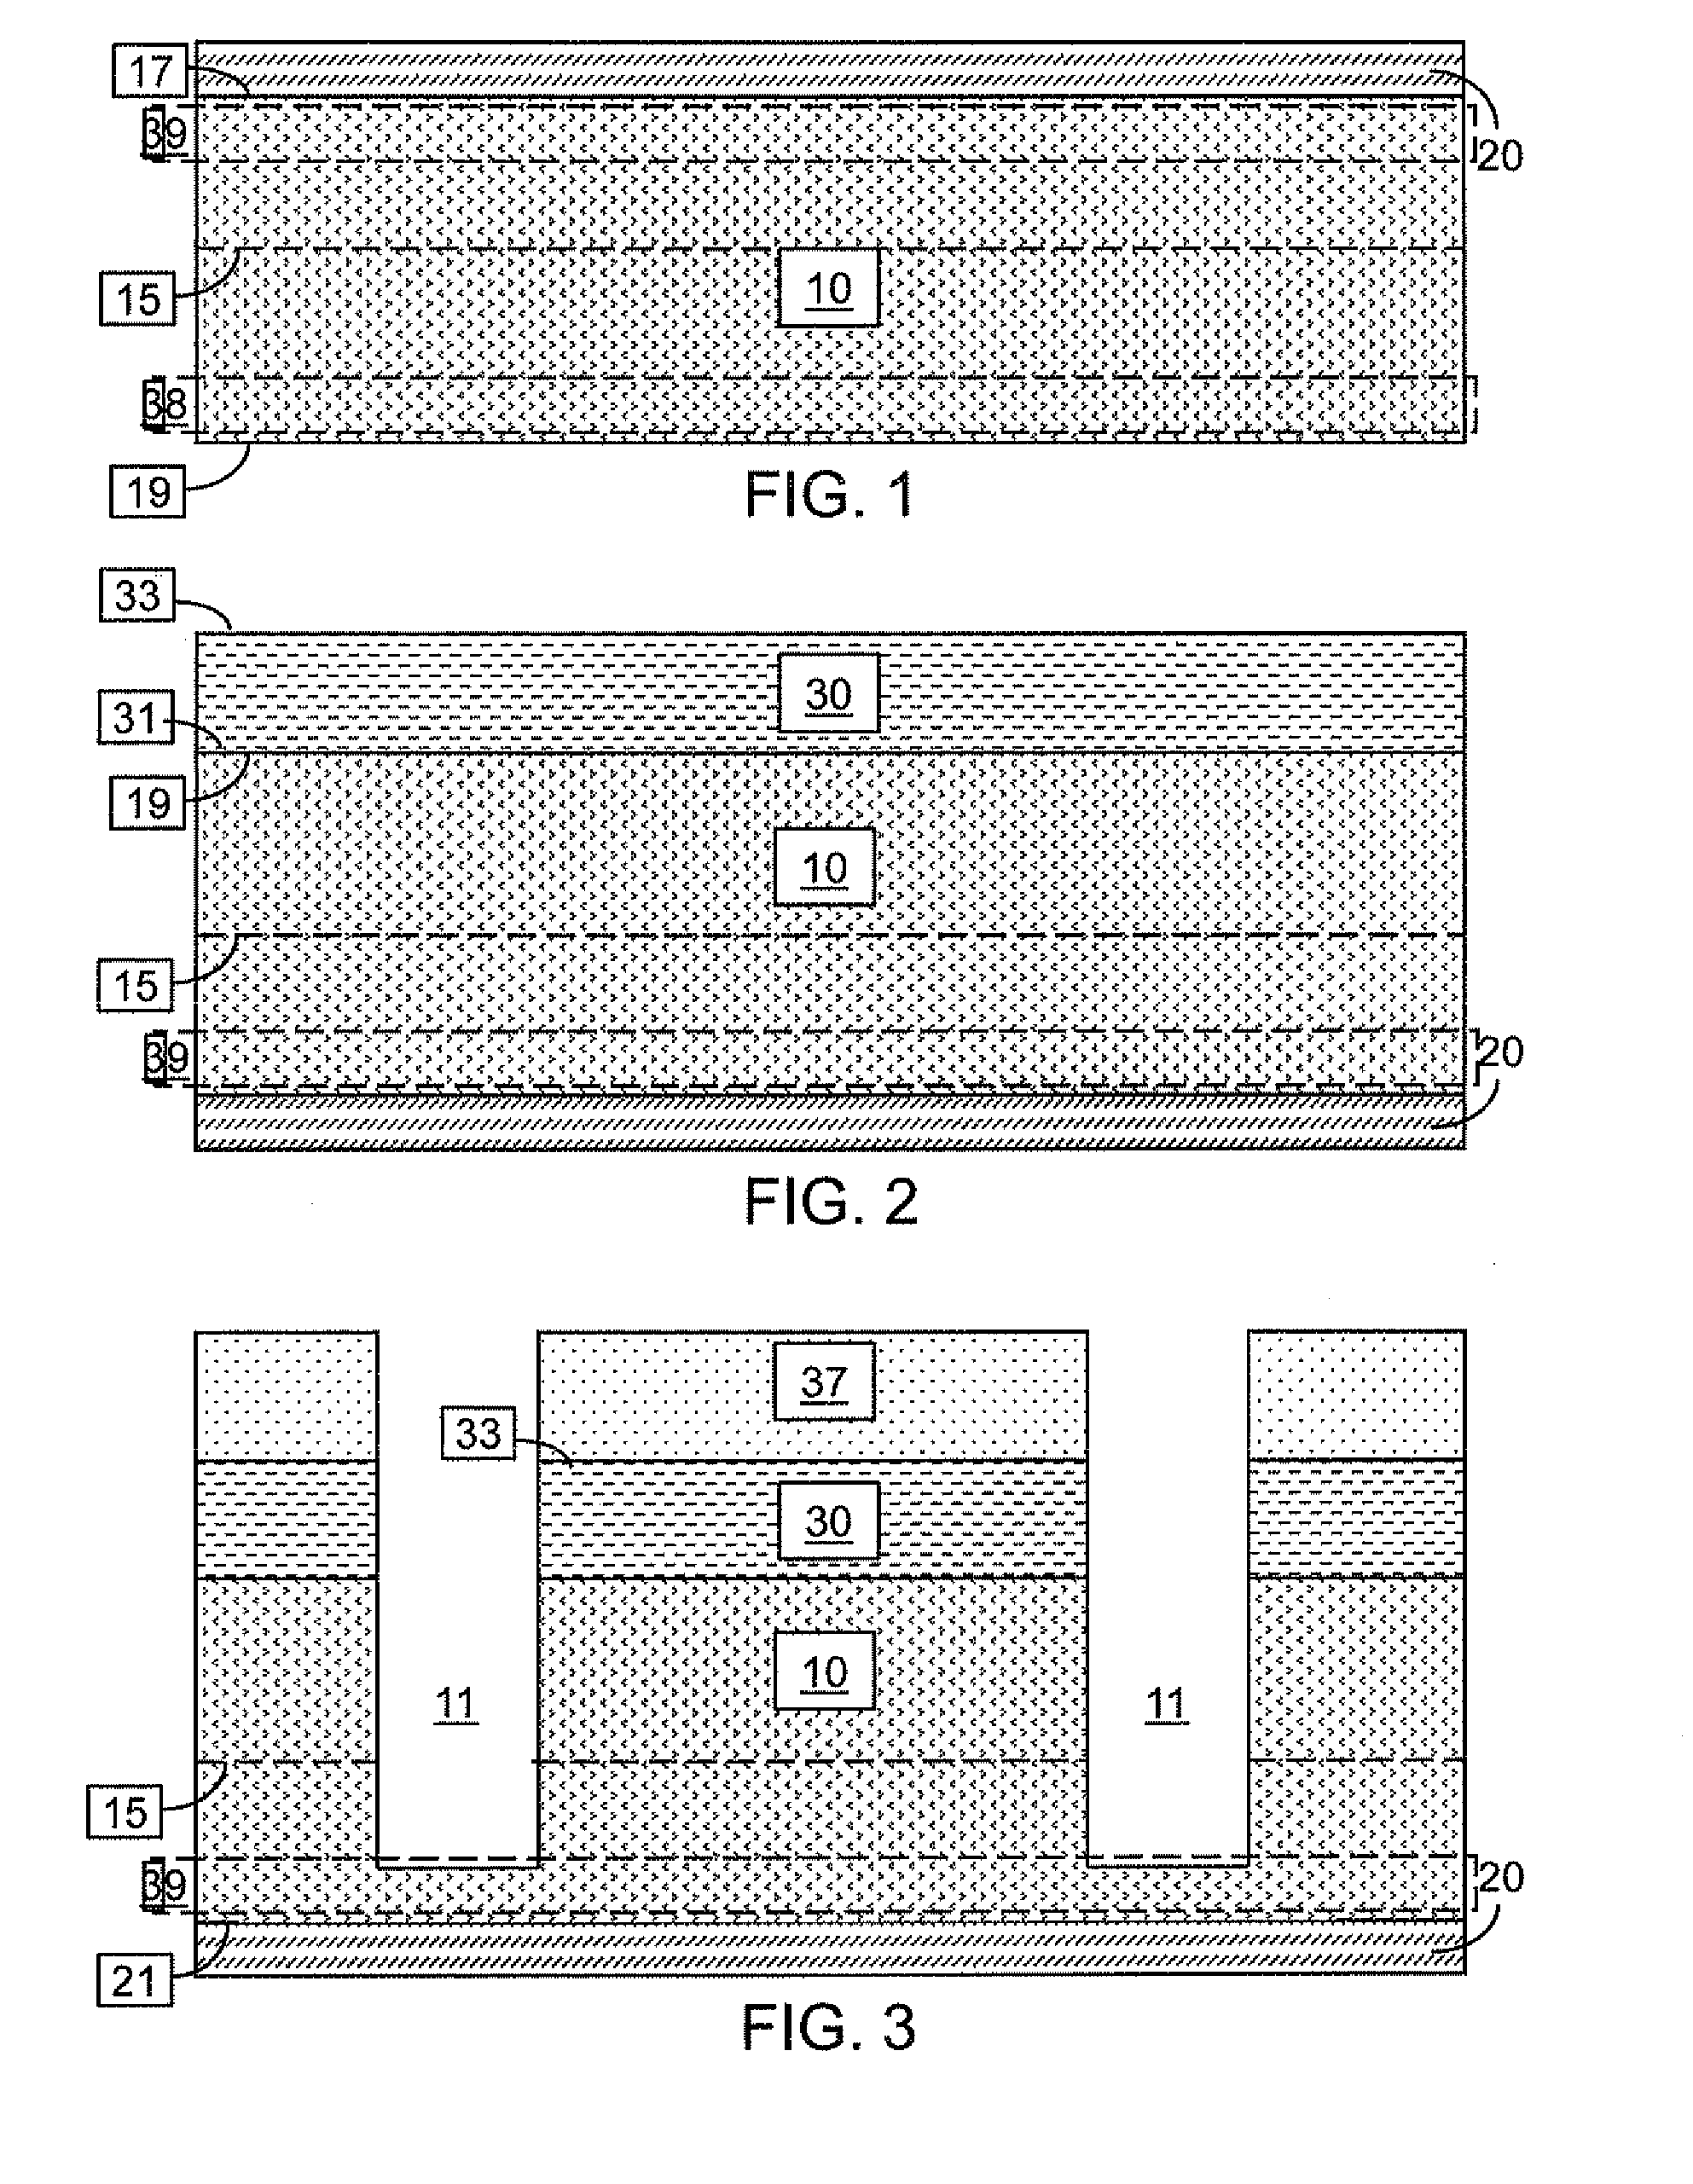 Grid-line-free contact for a photovoltaic cell